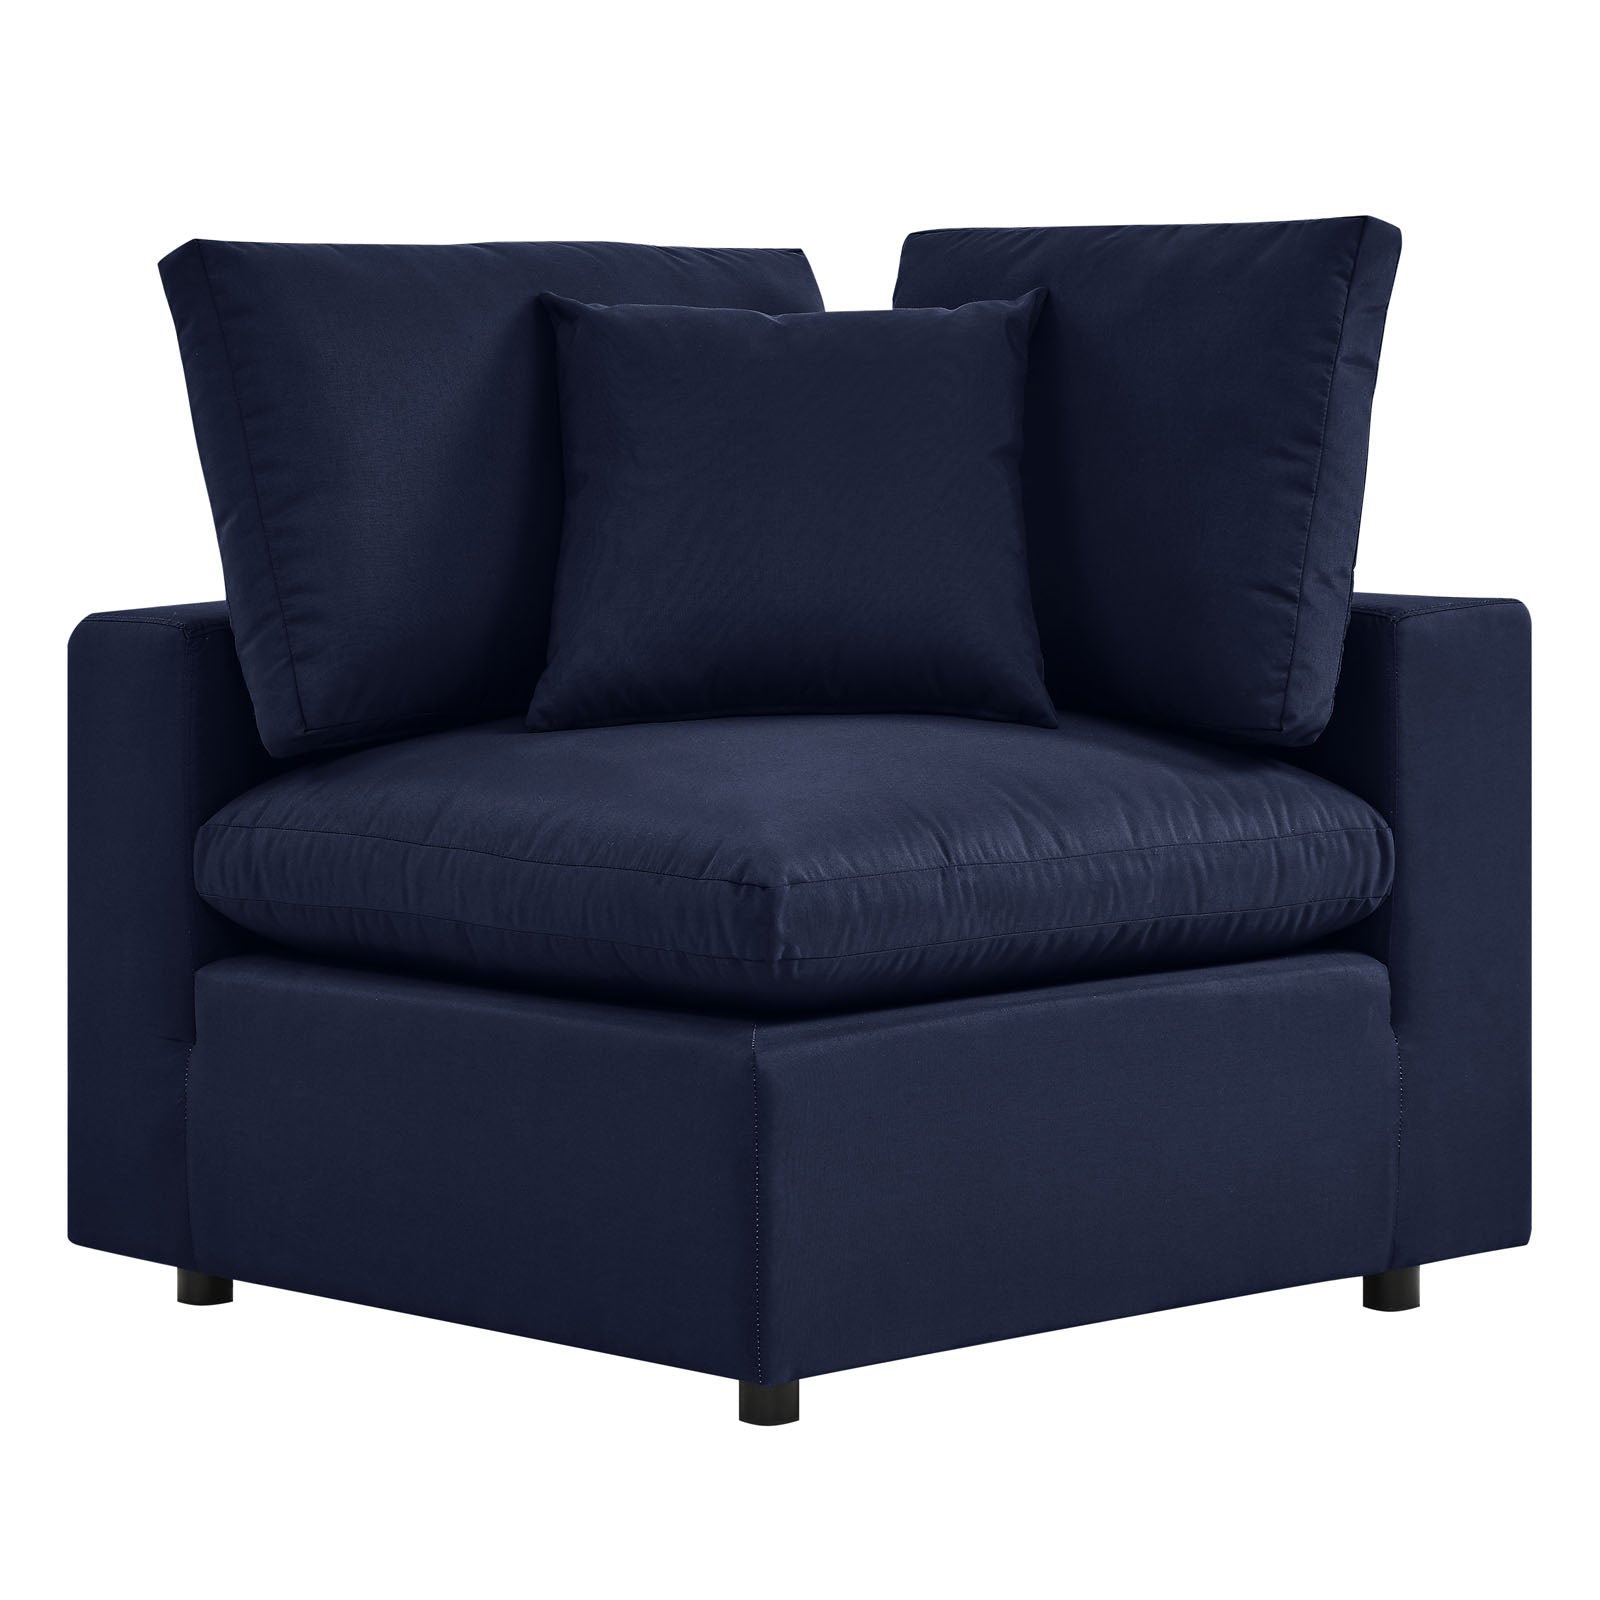 Modway Outdoor Sofas - Commix 5-Piece Outdoor 144 W Patio Sectional Sofa Navy